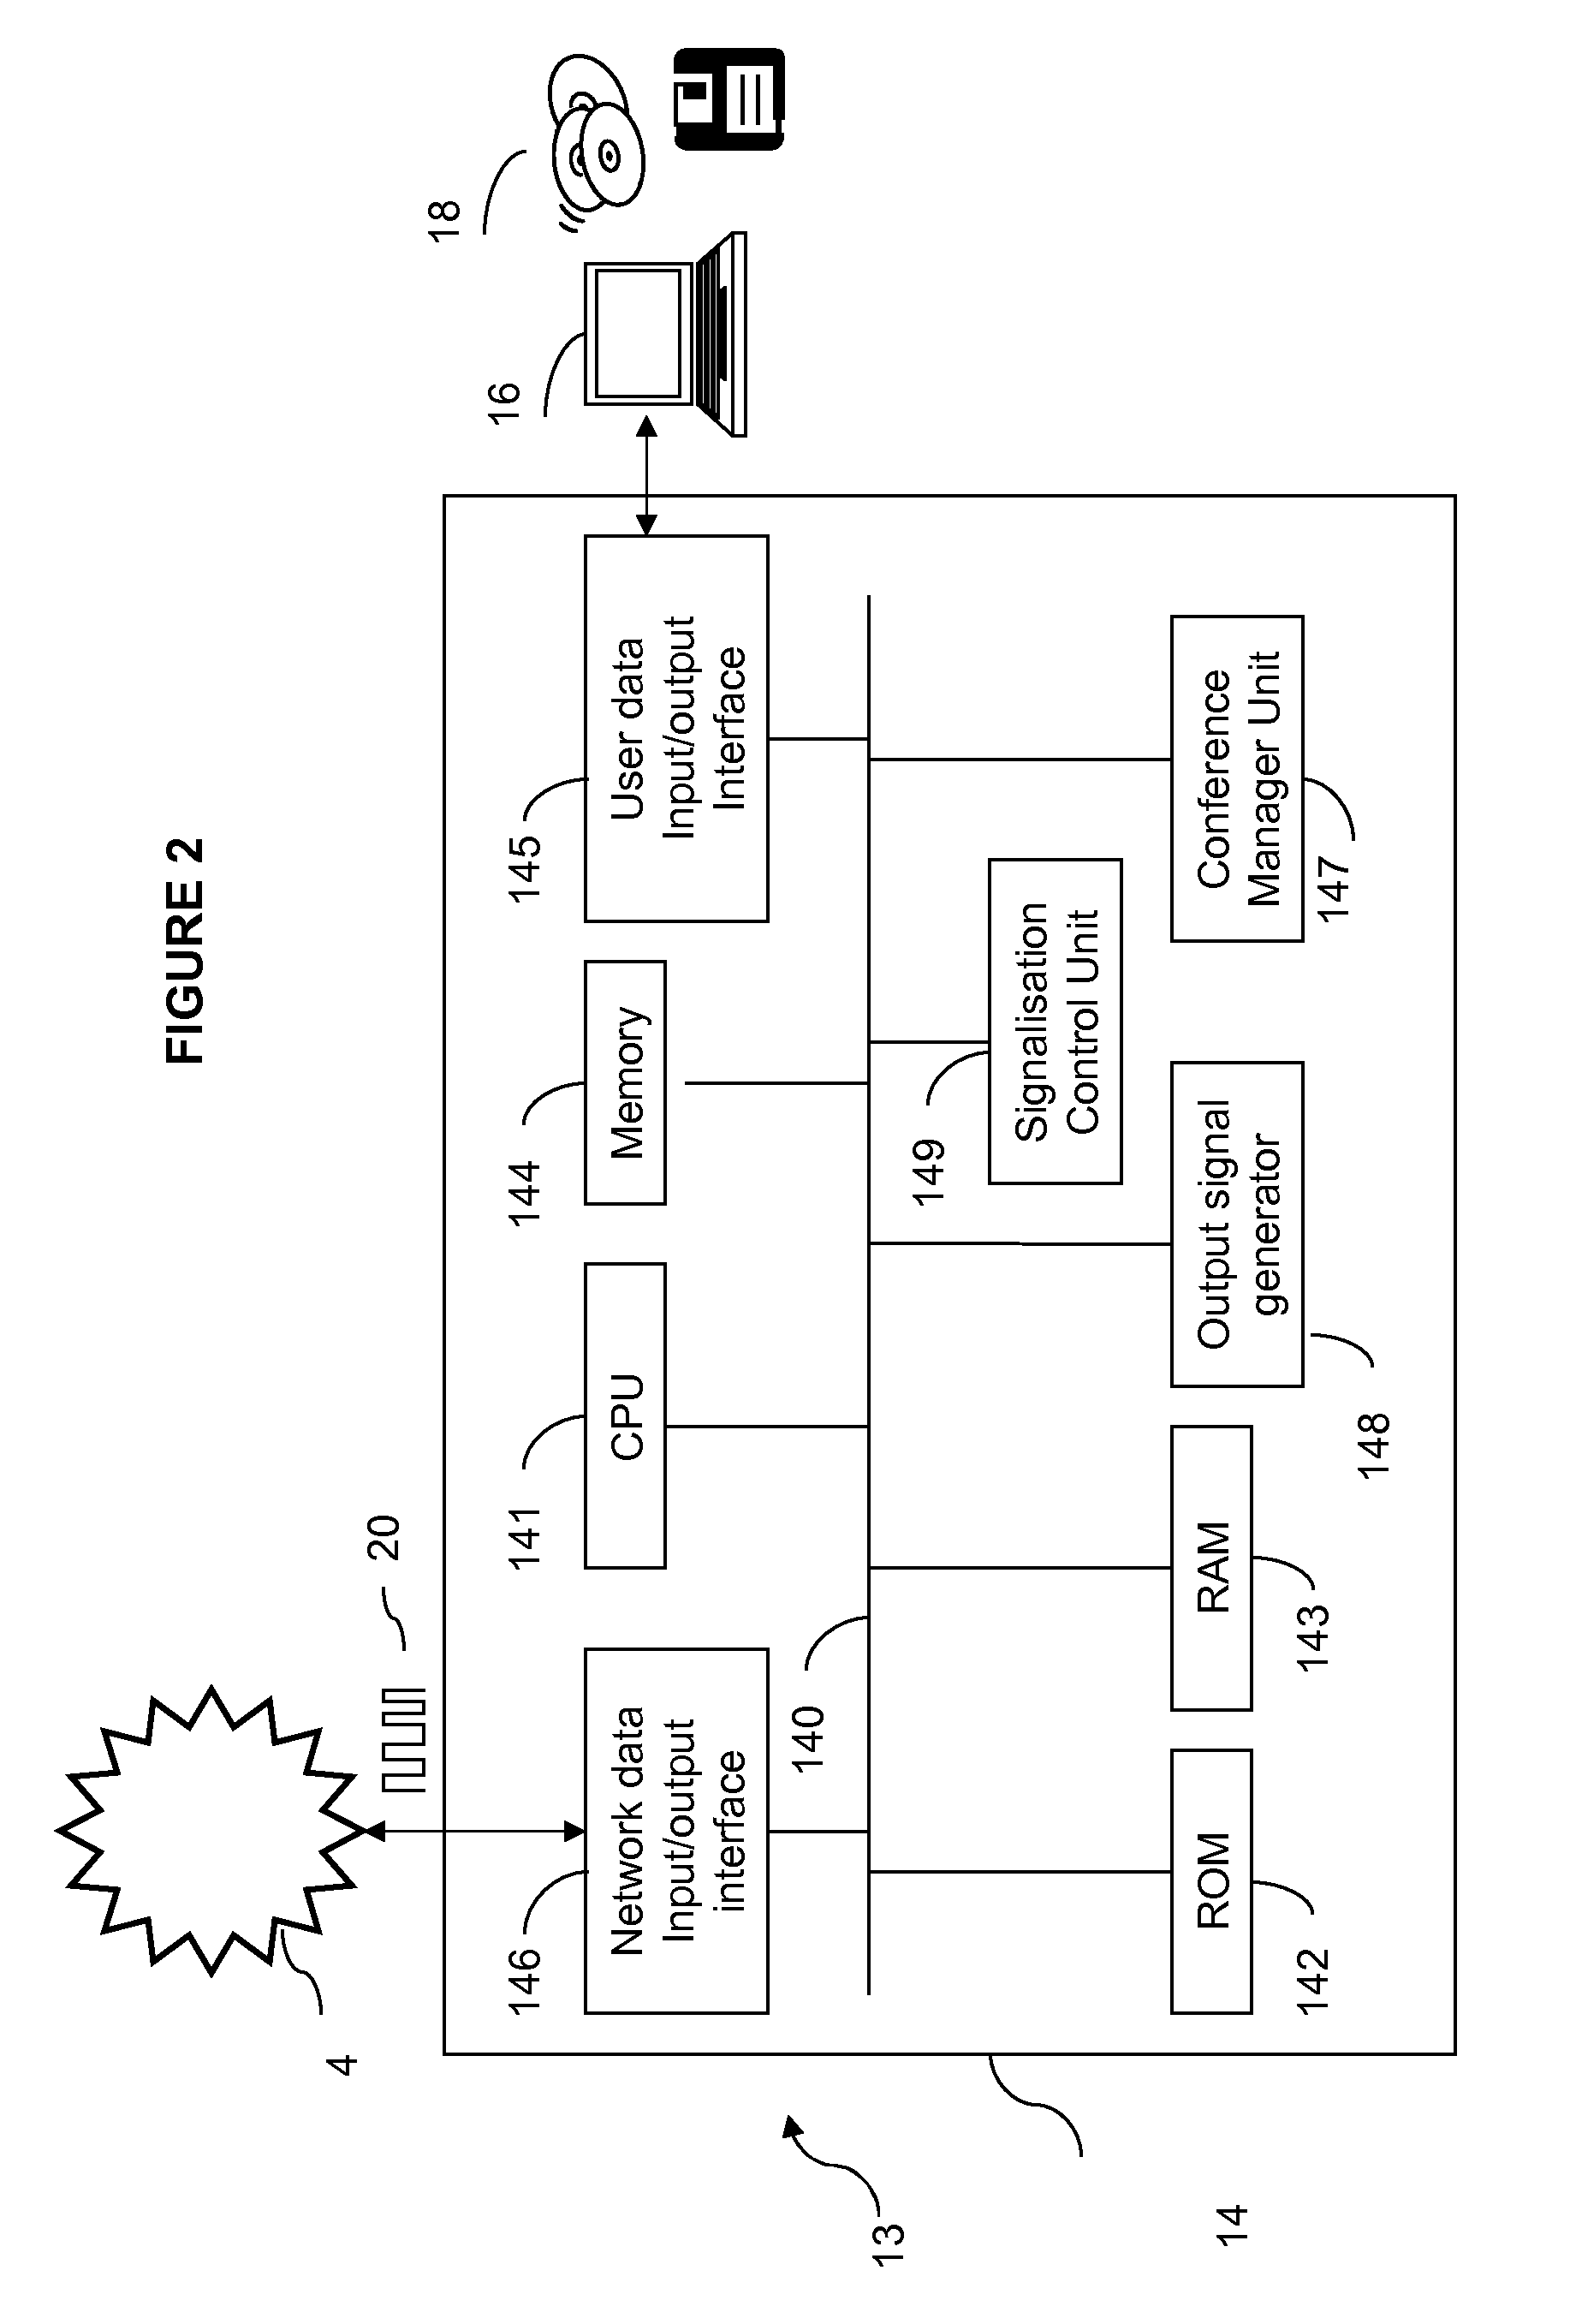 Apparatus and Method for Asymmetrical Conferencing Between Local and External Transceivers